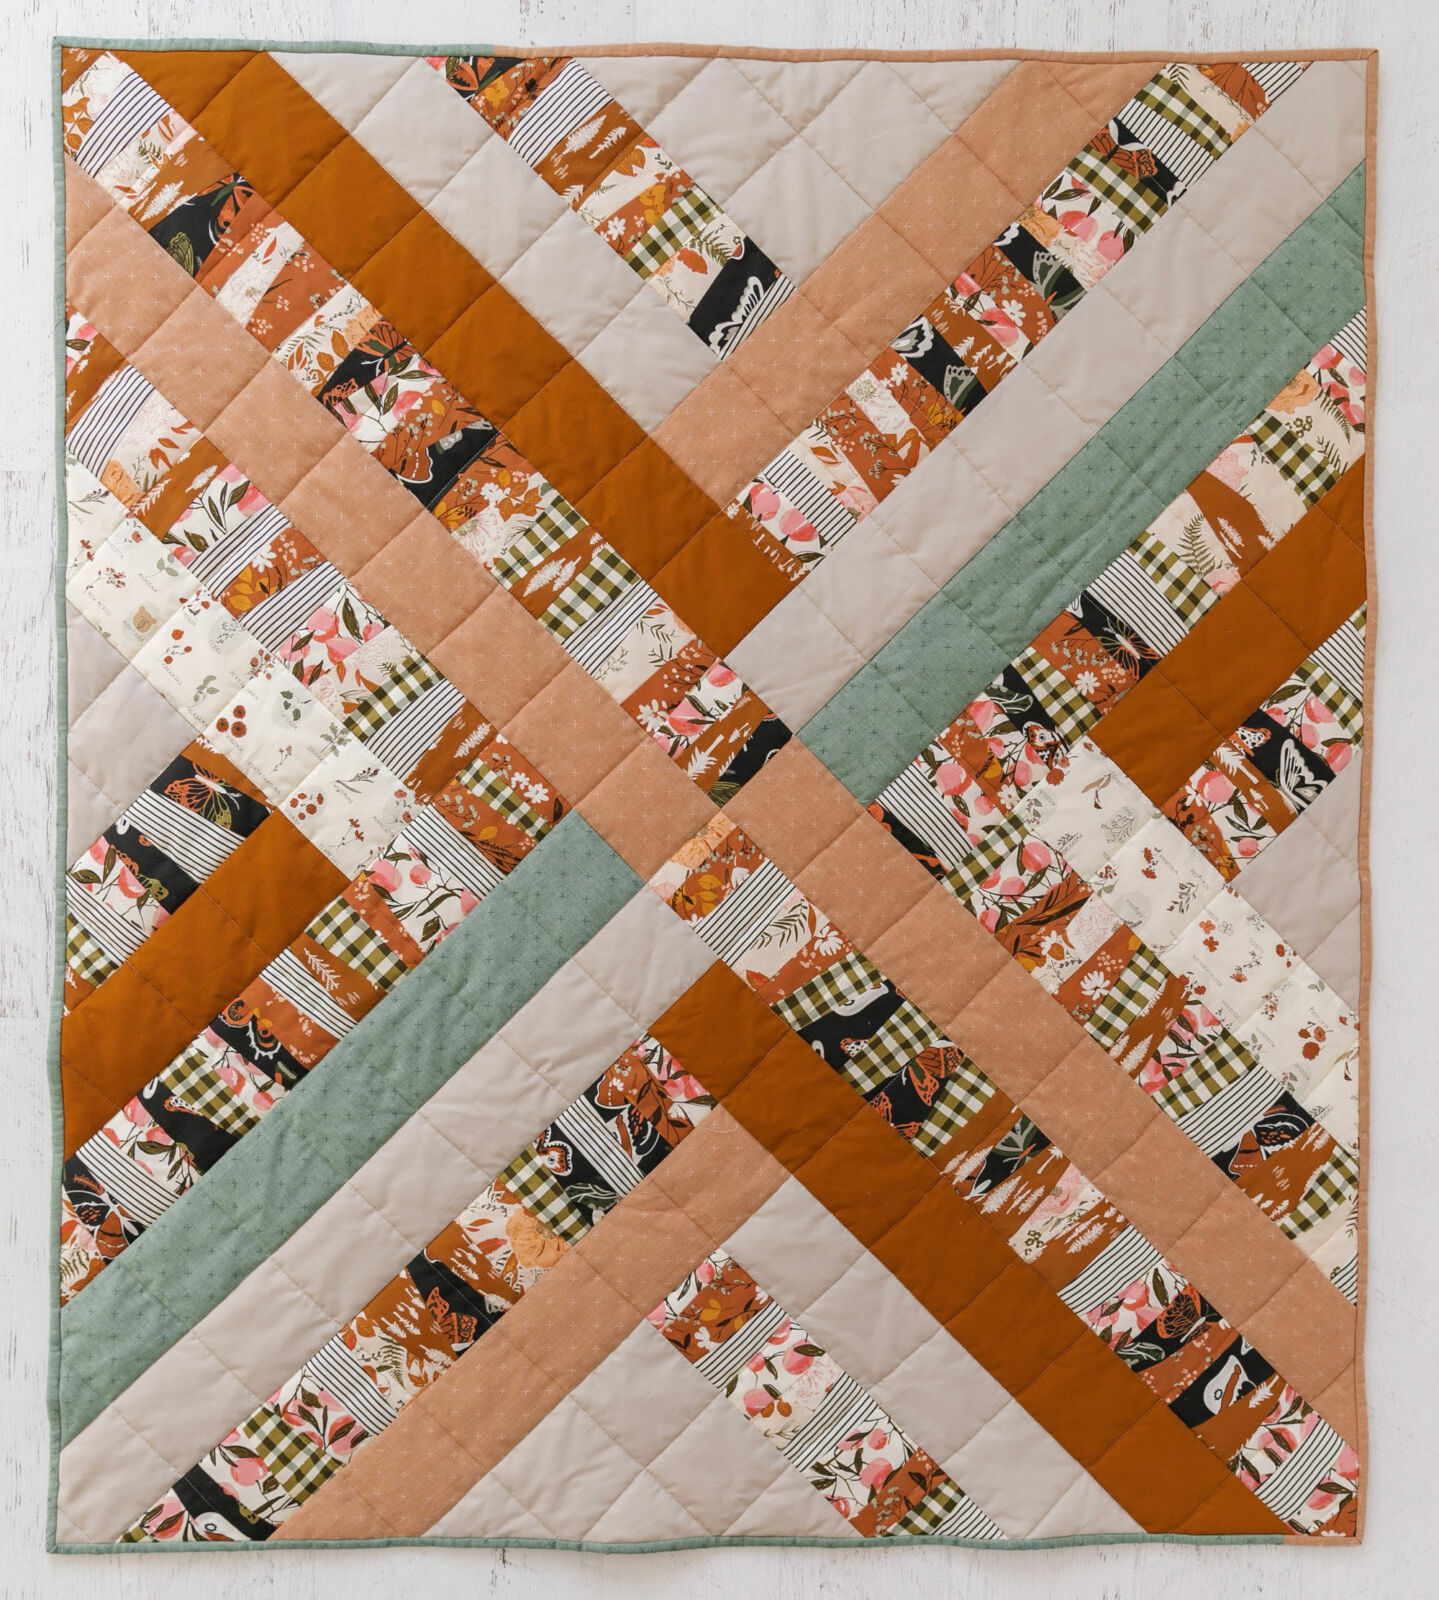 Get the Garland quilt pattern and make this beautiful quilt!